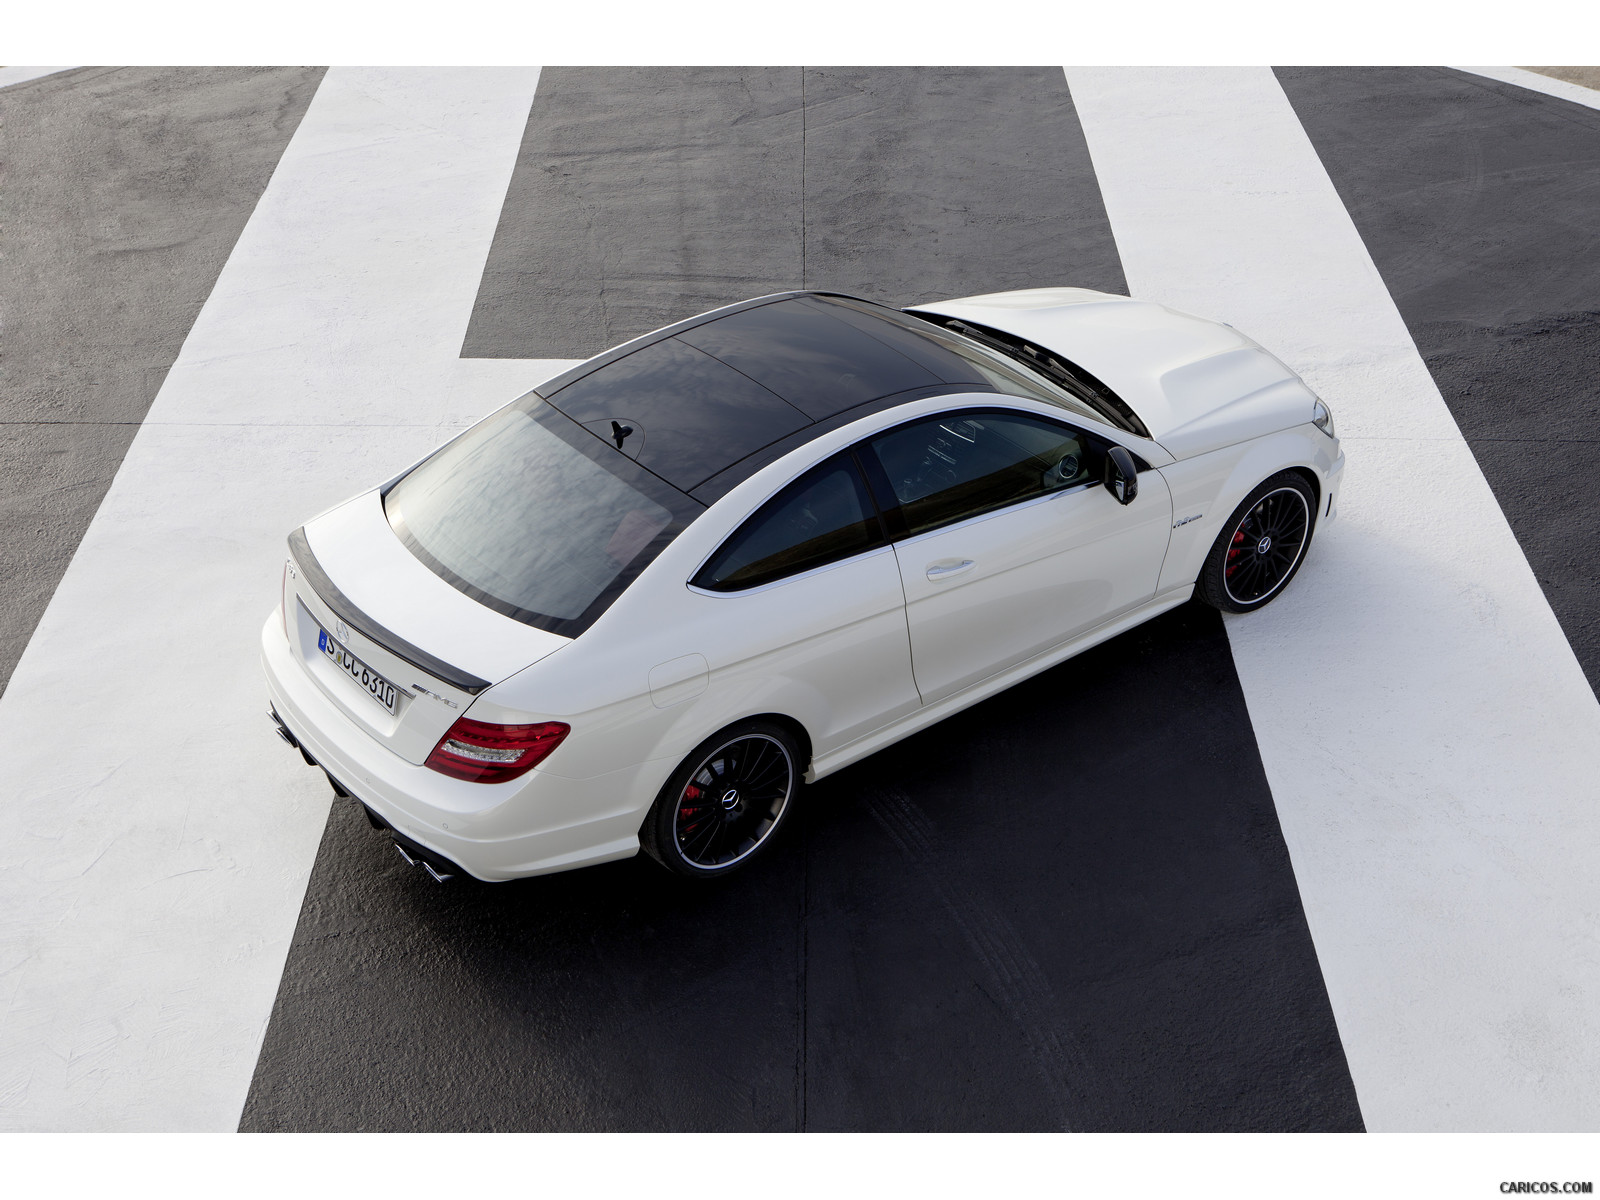 Mercedes-Benz C63 AMG Coupe (2012)  - Top, #36 of 64